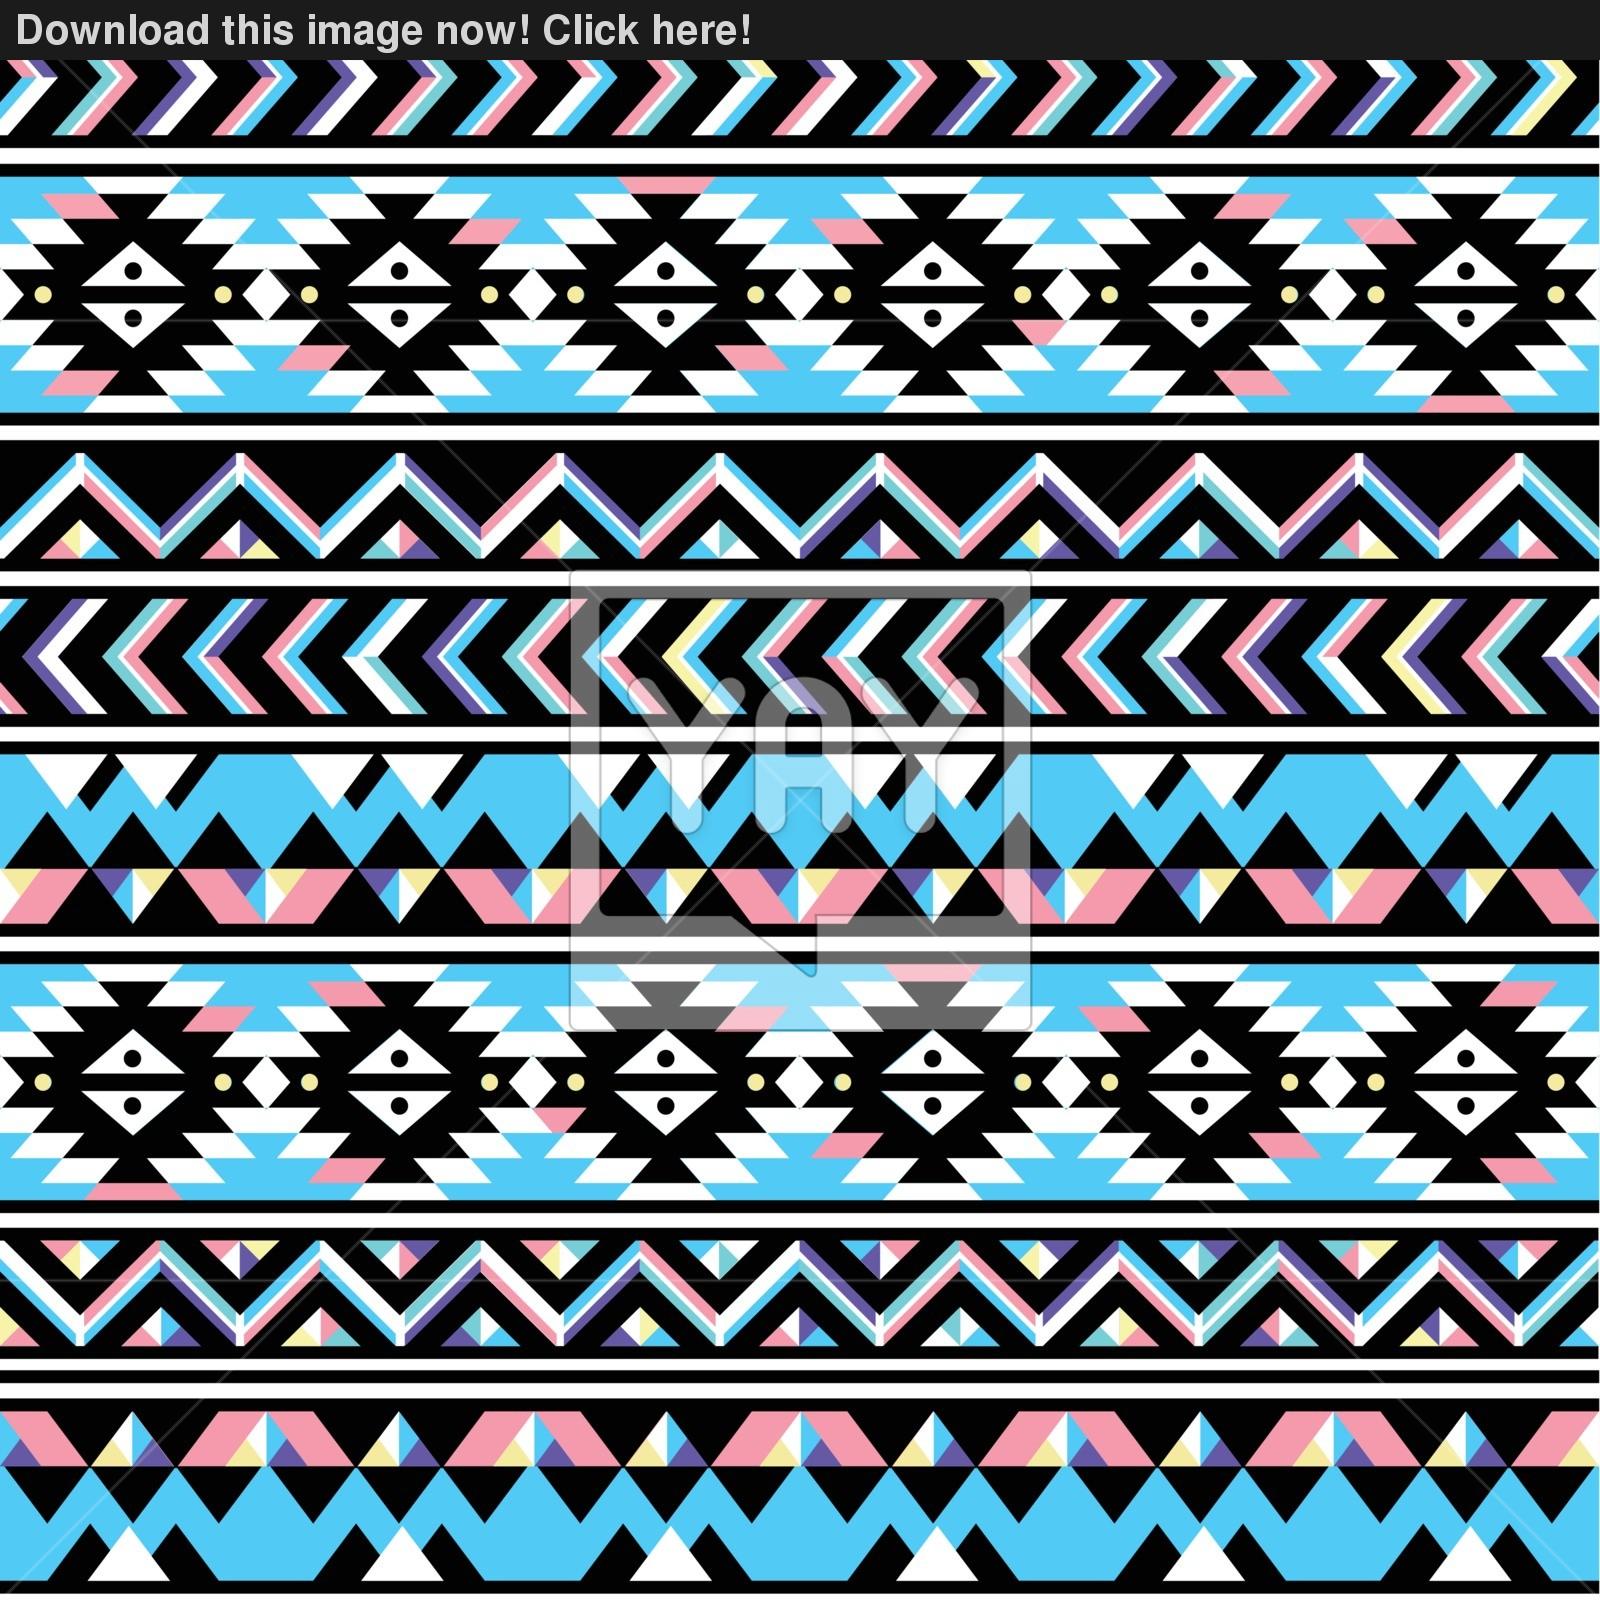 Tribal aztec seamless blue and pink pattern vector